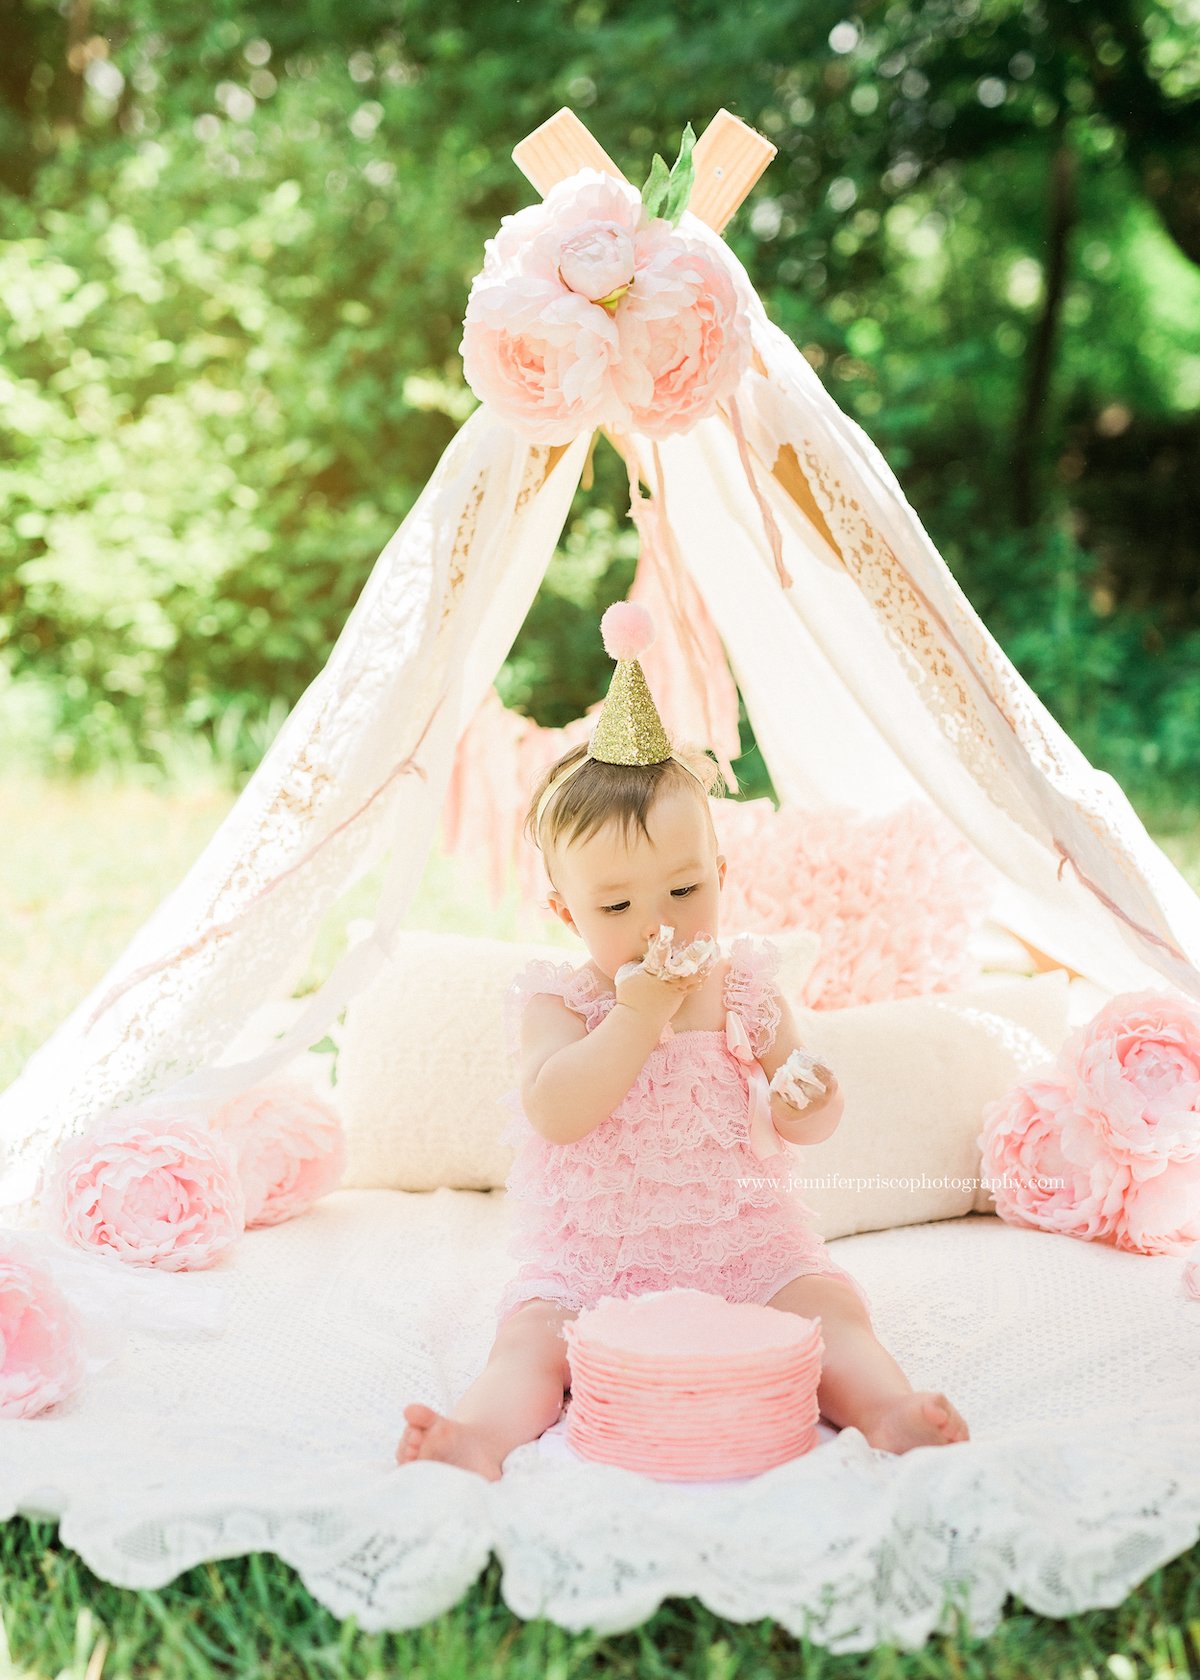 How to DIY Your Child's 1st Birthday Photoshoot